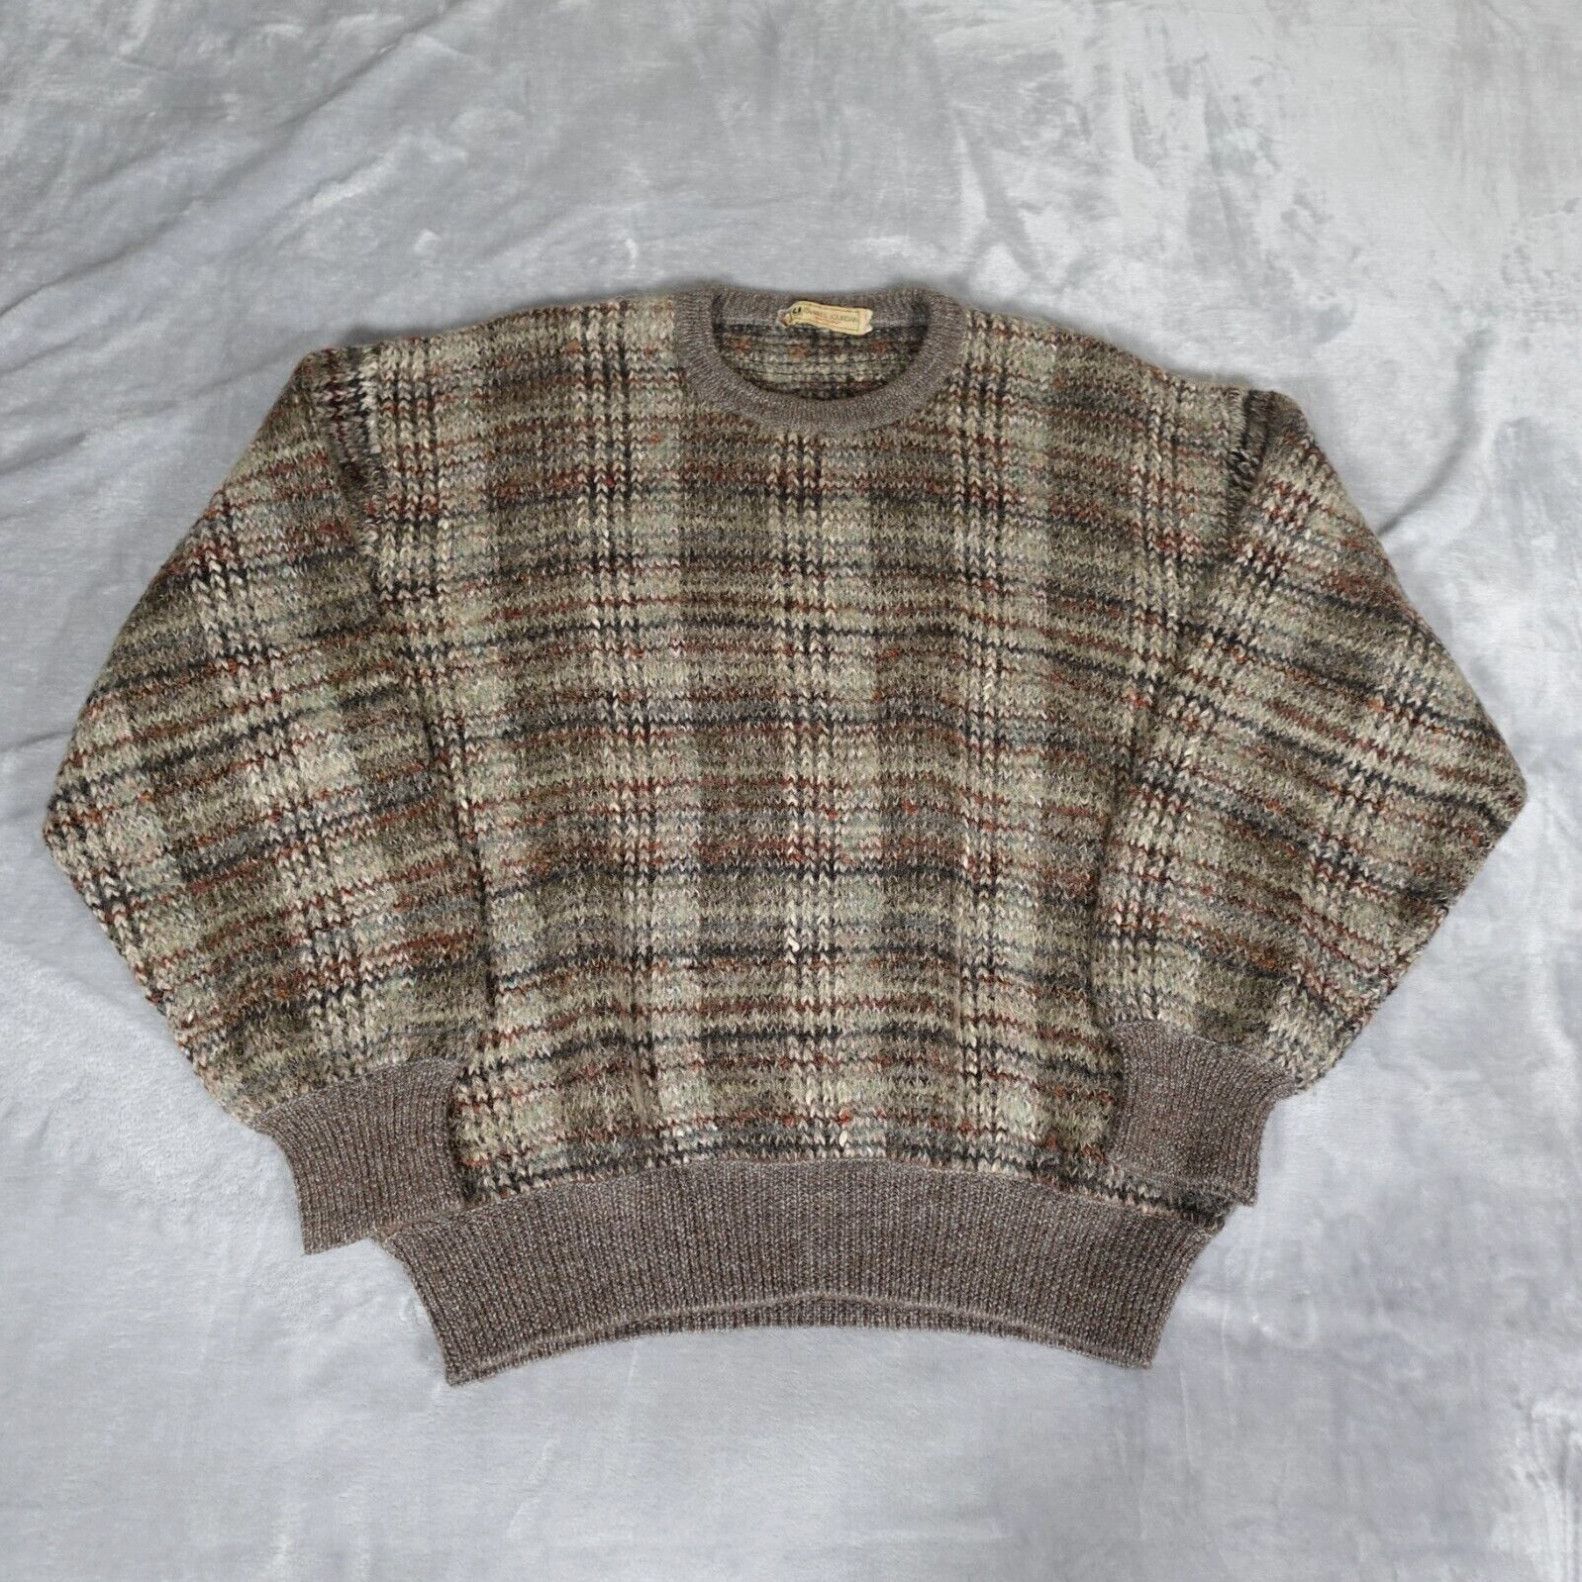 Charles Jourdan Vintage Charles Jourdan Crewneck Sweater Womens L Wool Mohair Made In Italy Tan Size L / US 10 / IT 46 - 1 Preview